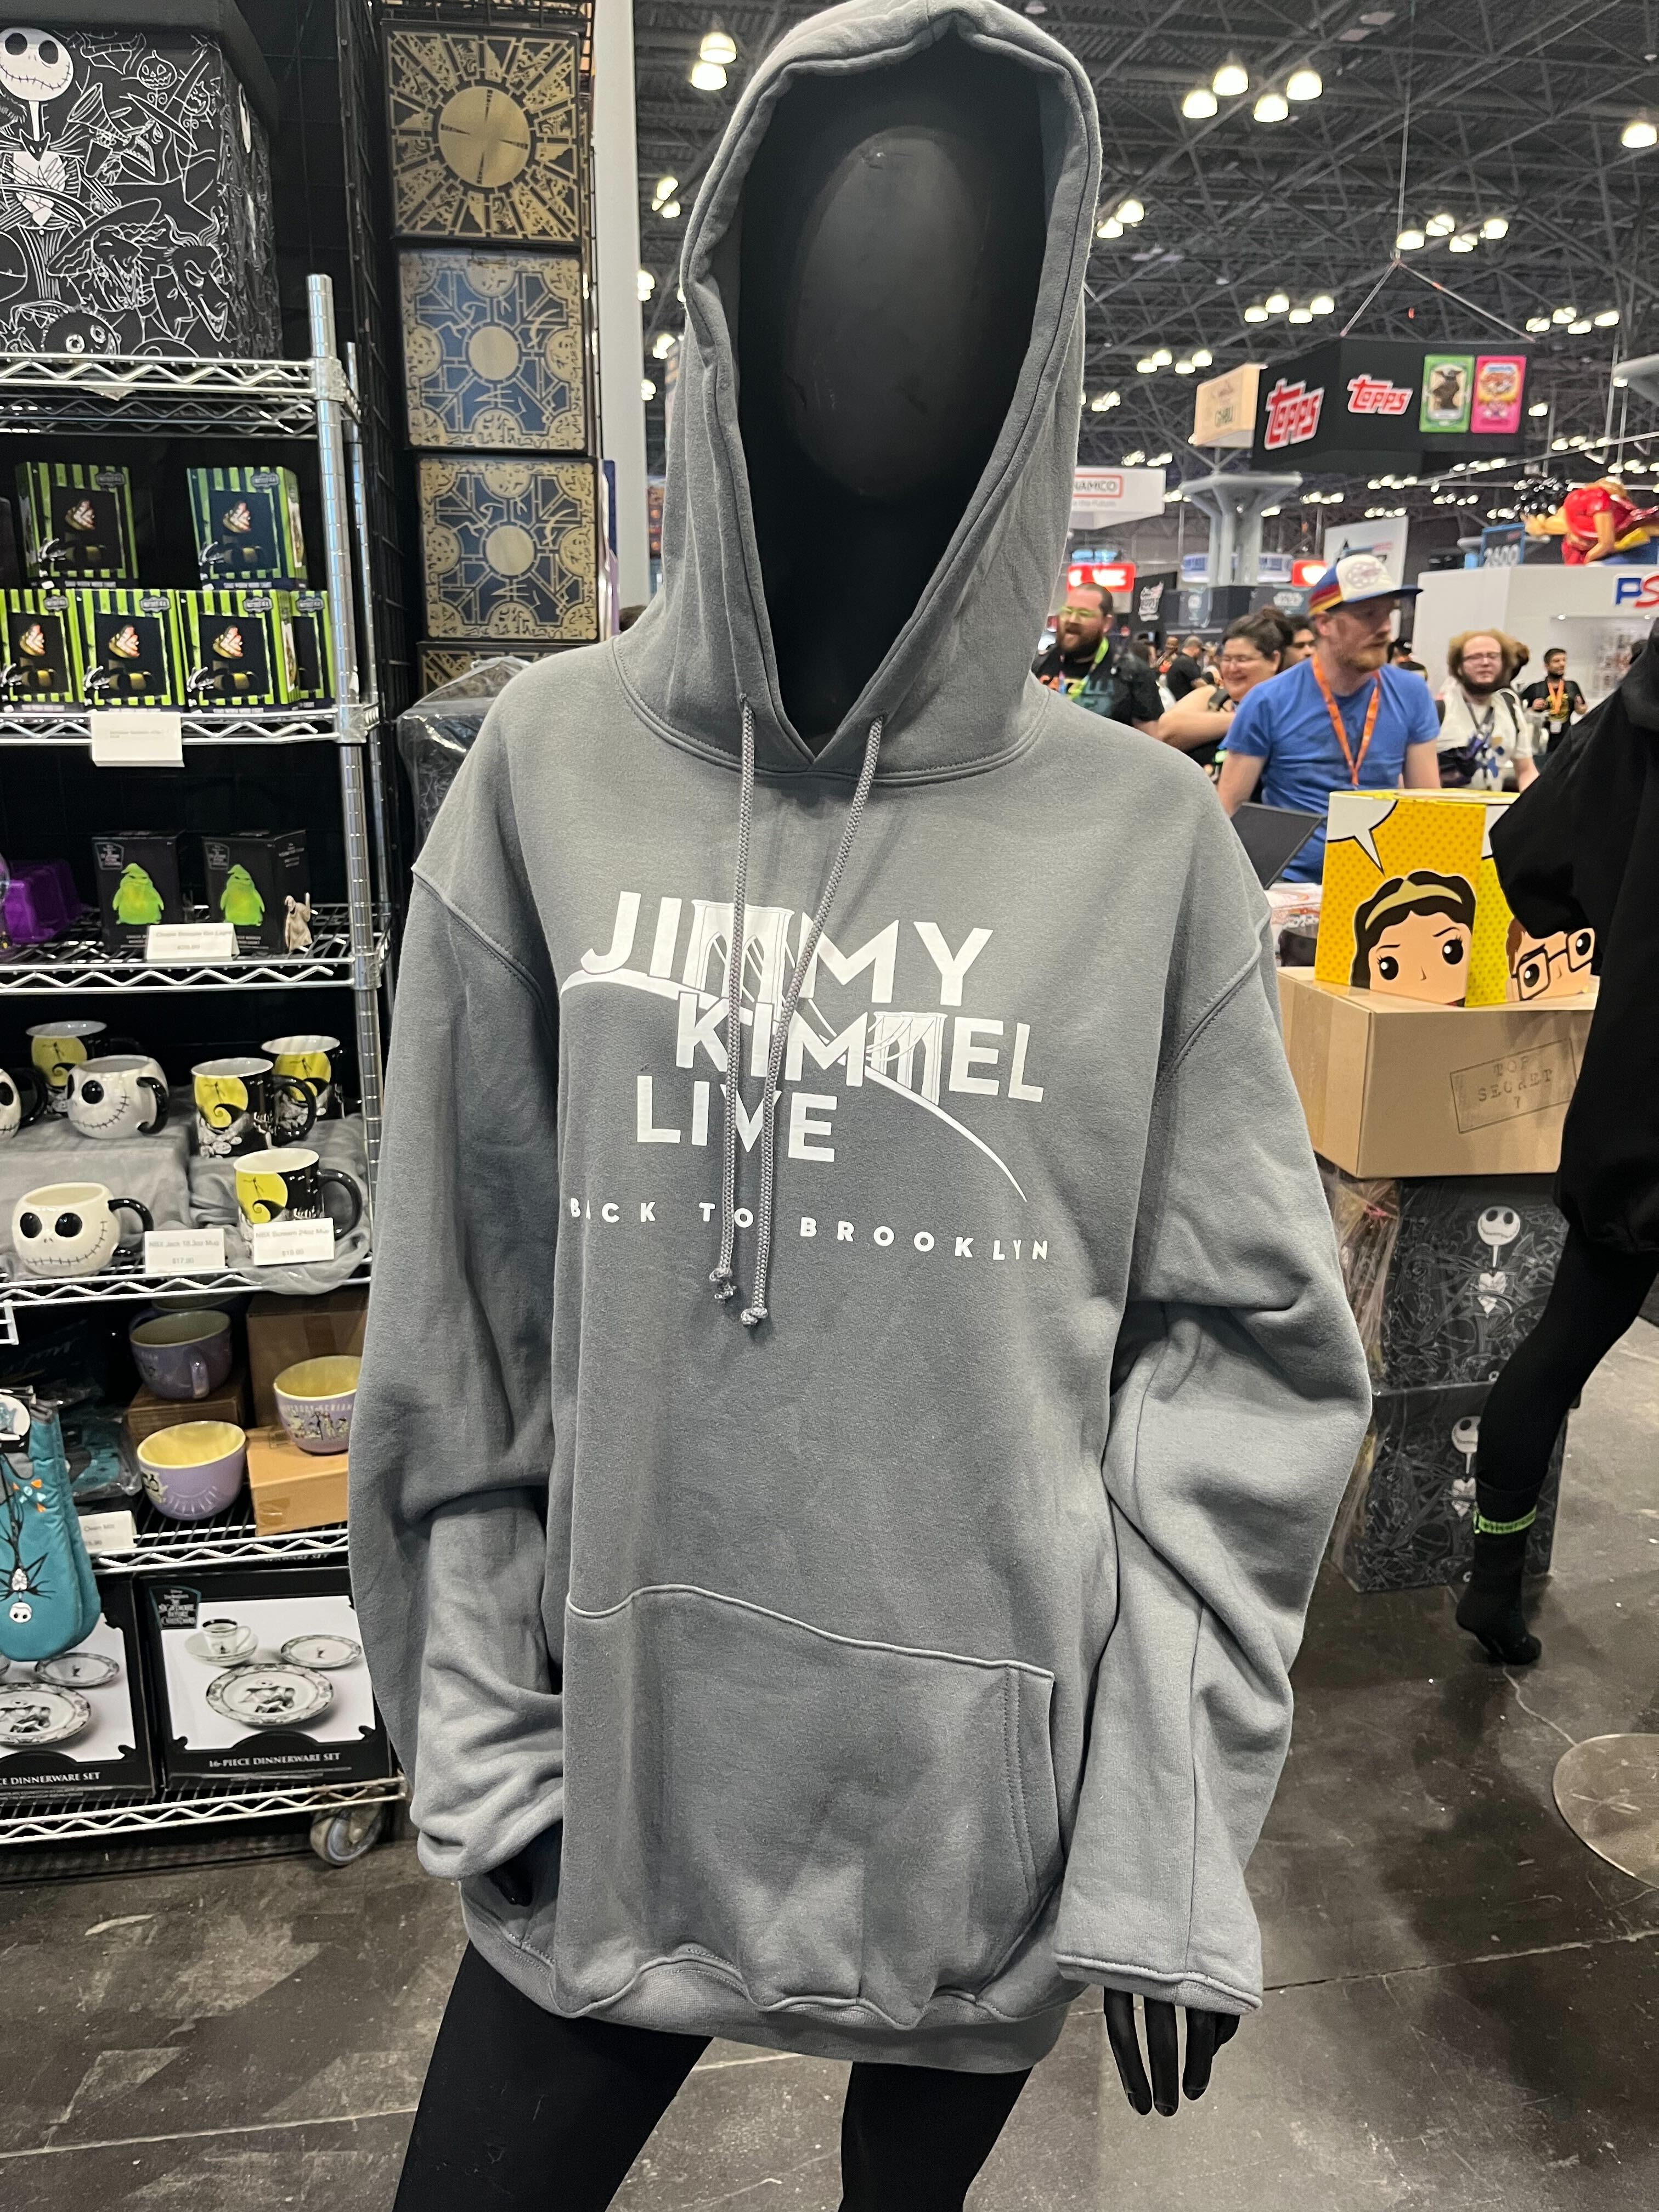 A Jimmy Kimmel Live hoodie. What is this doing here?